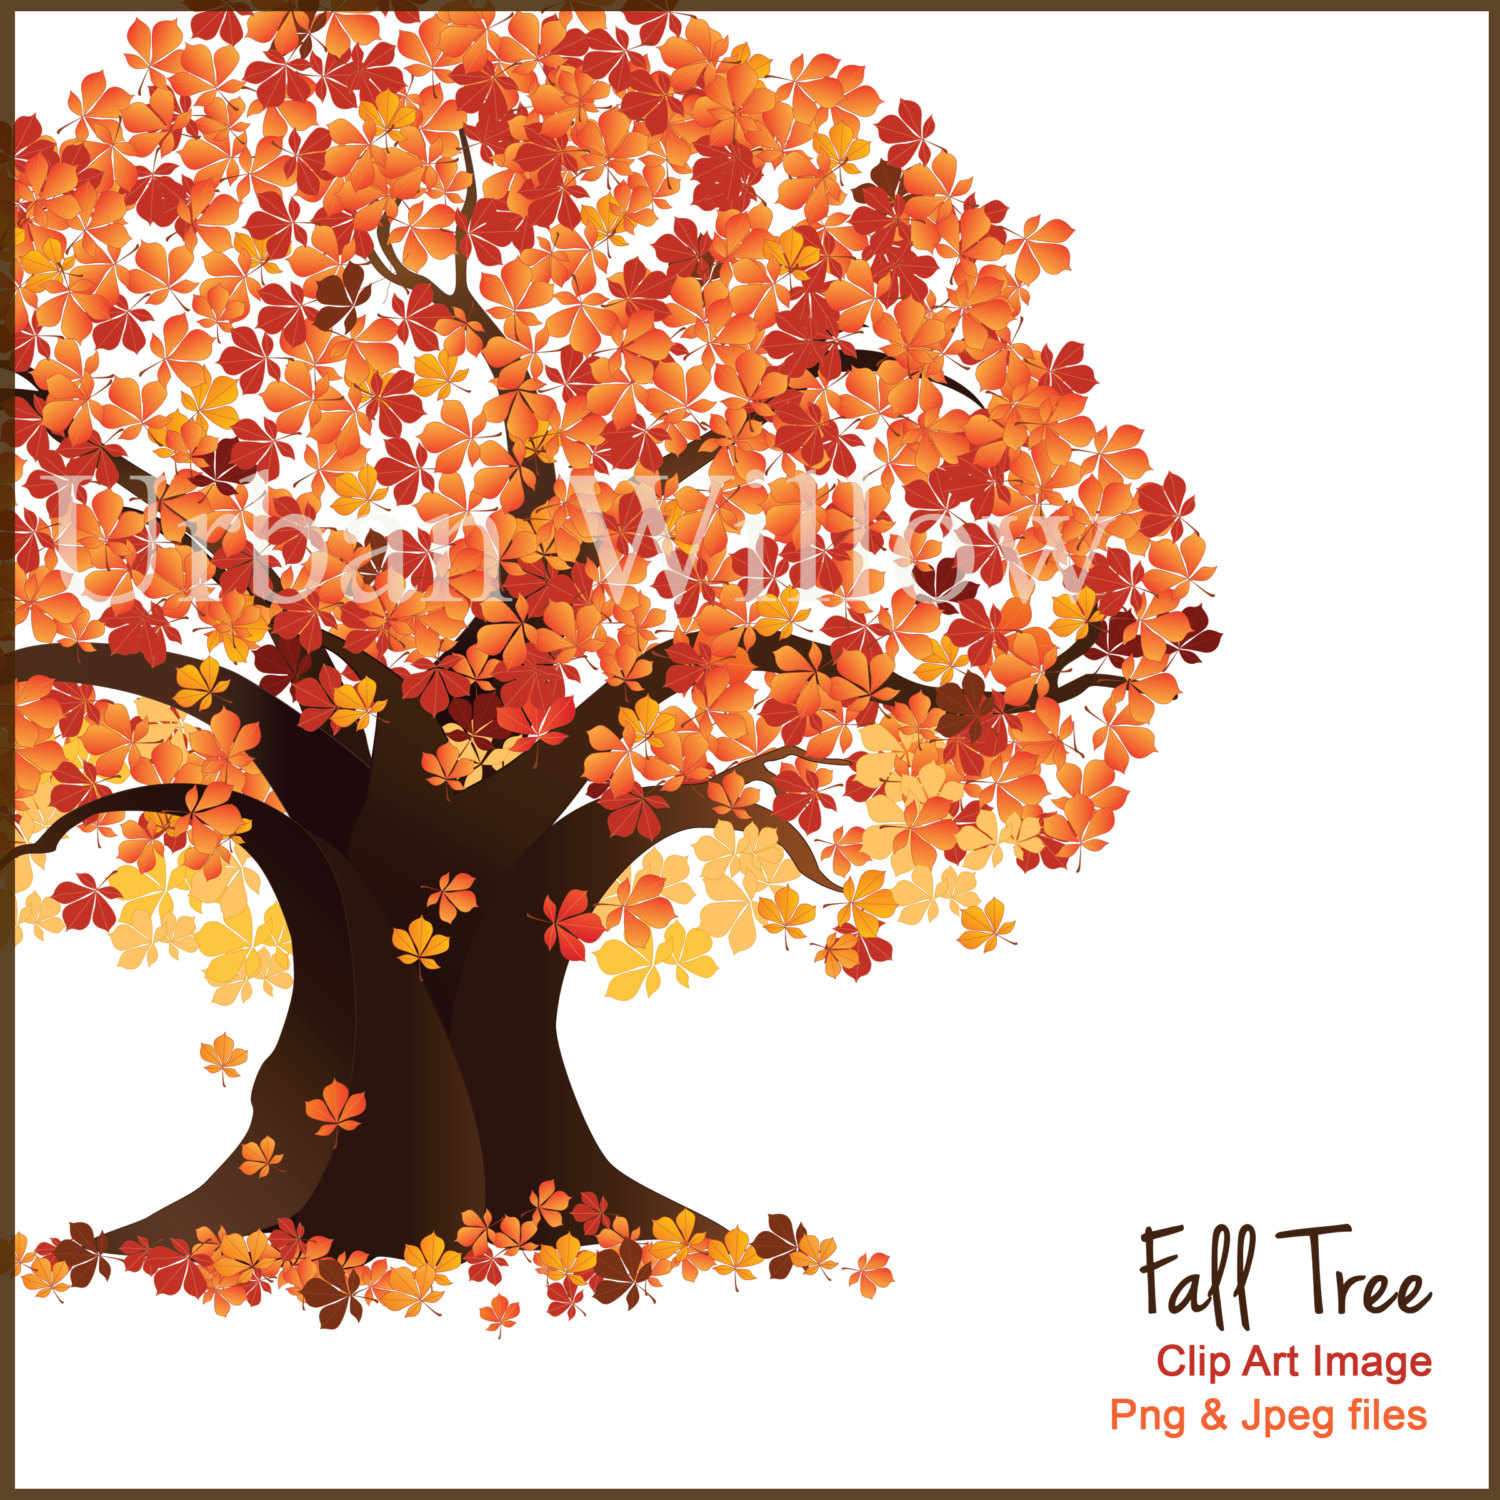 clipart maple tree with falling seeds - Clipground